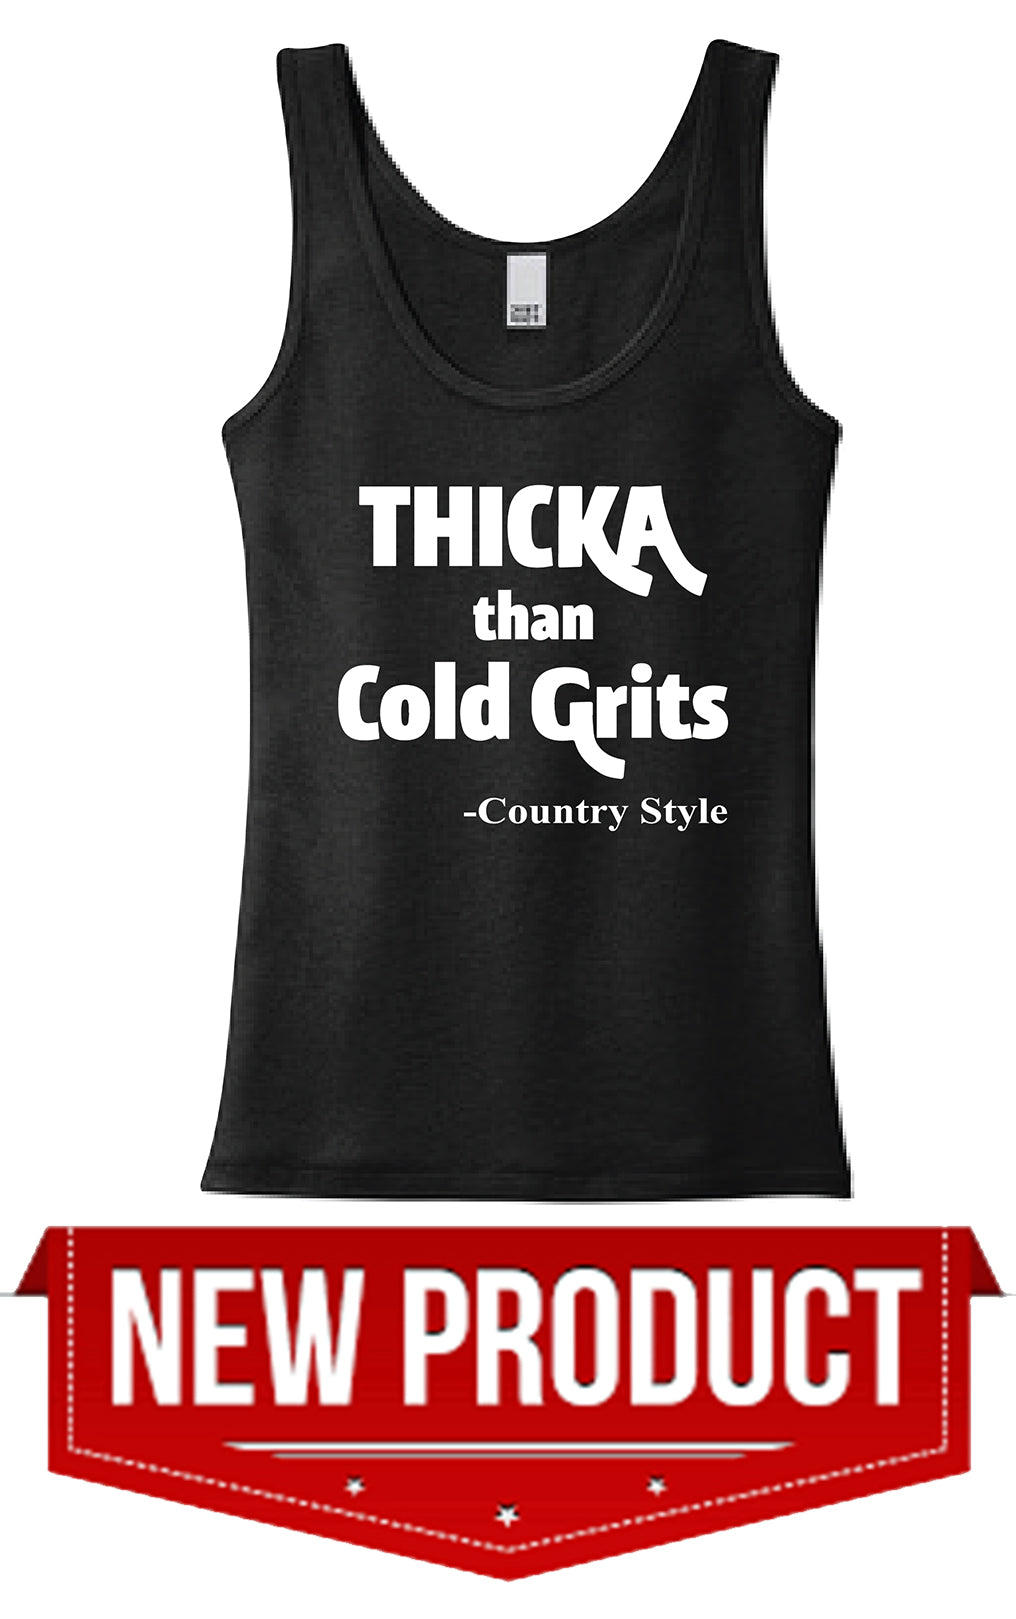 Thicka Than Cold Grits Black Tank Top Sizes S-3XL